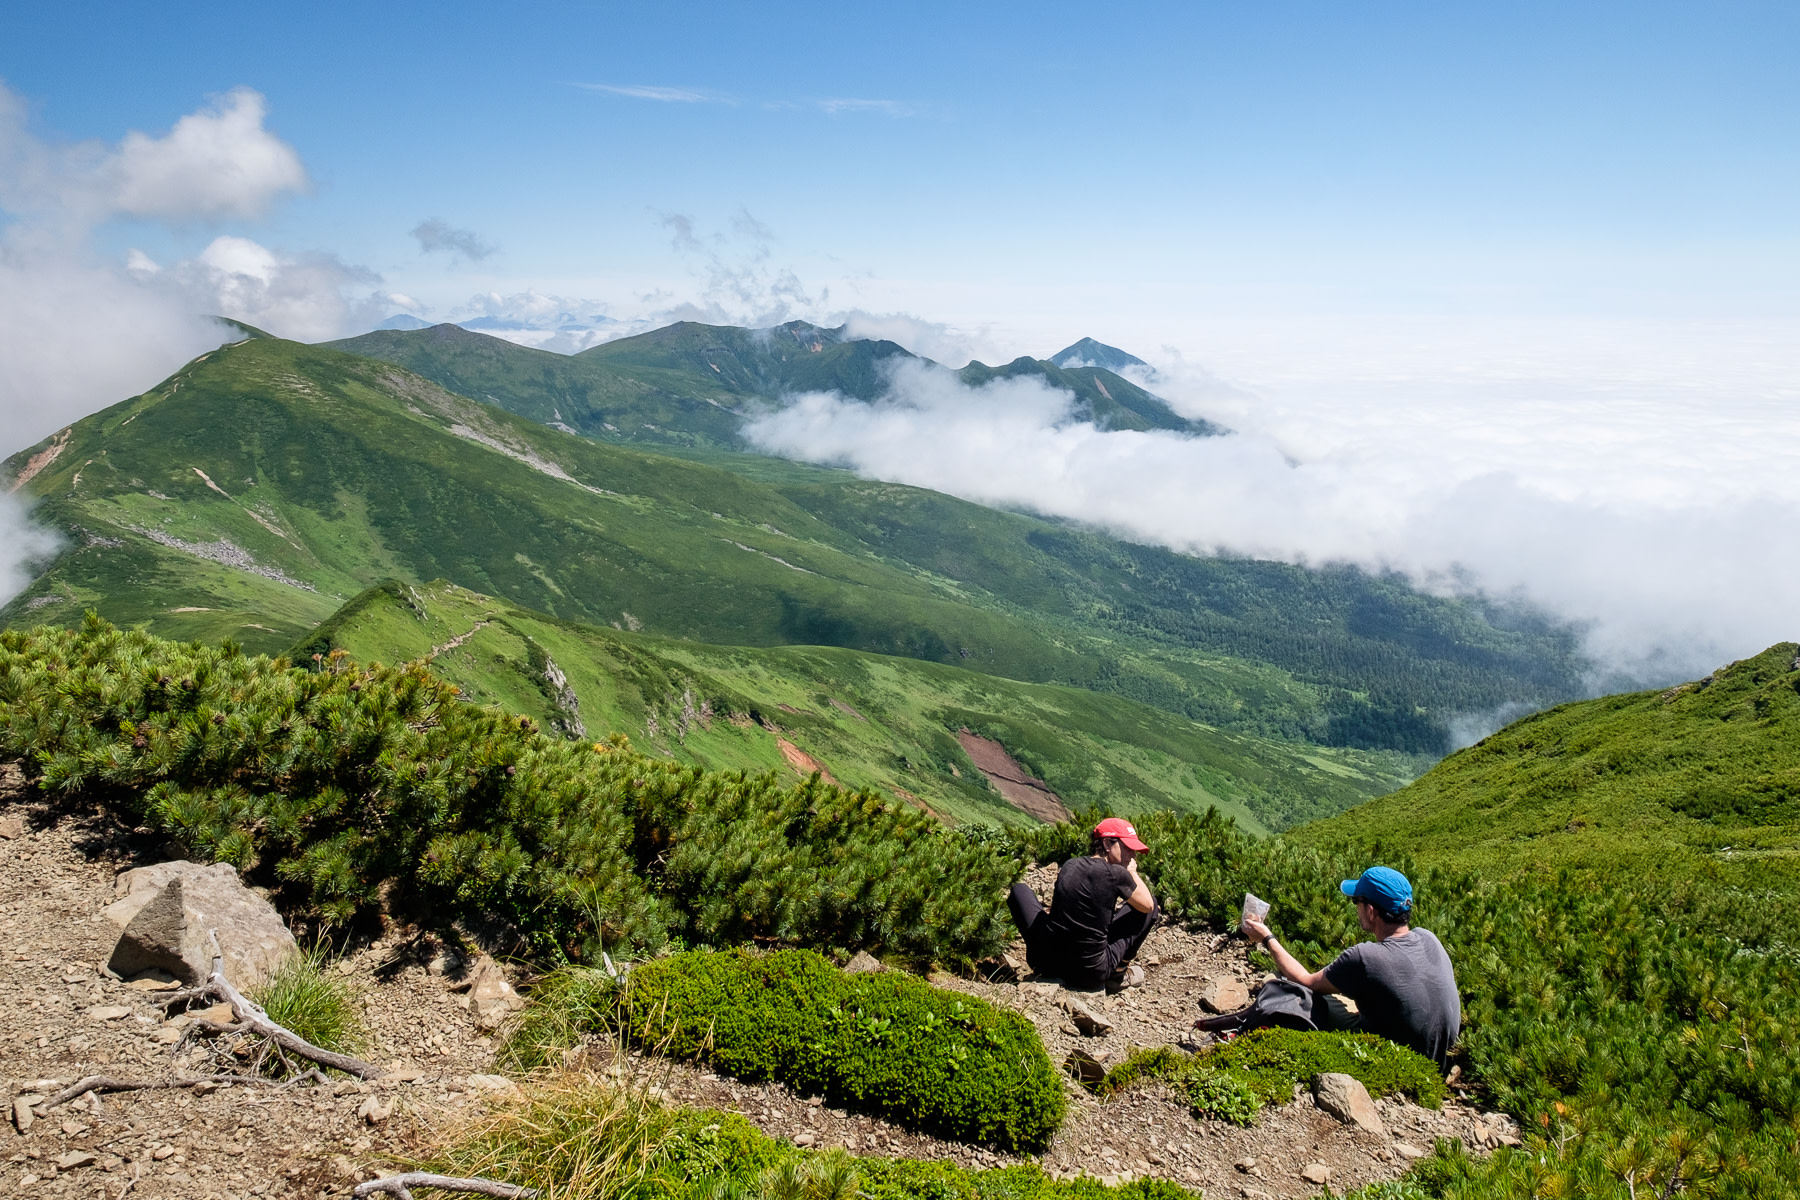 Two hikers share lunch at the summit of Mt. Furano. The mountain ridge stretches into the distance, surrounded by a sea of cloud